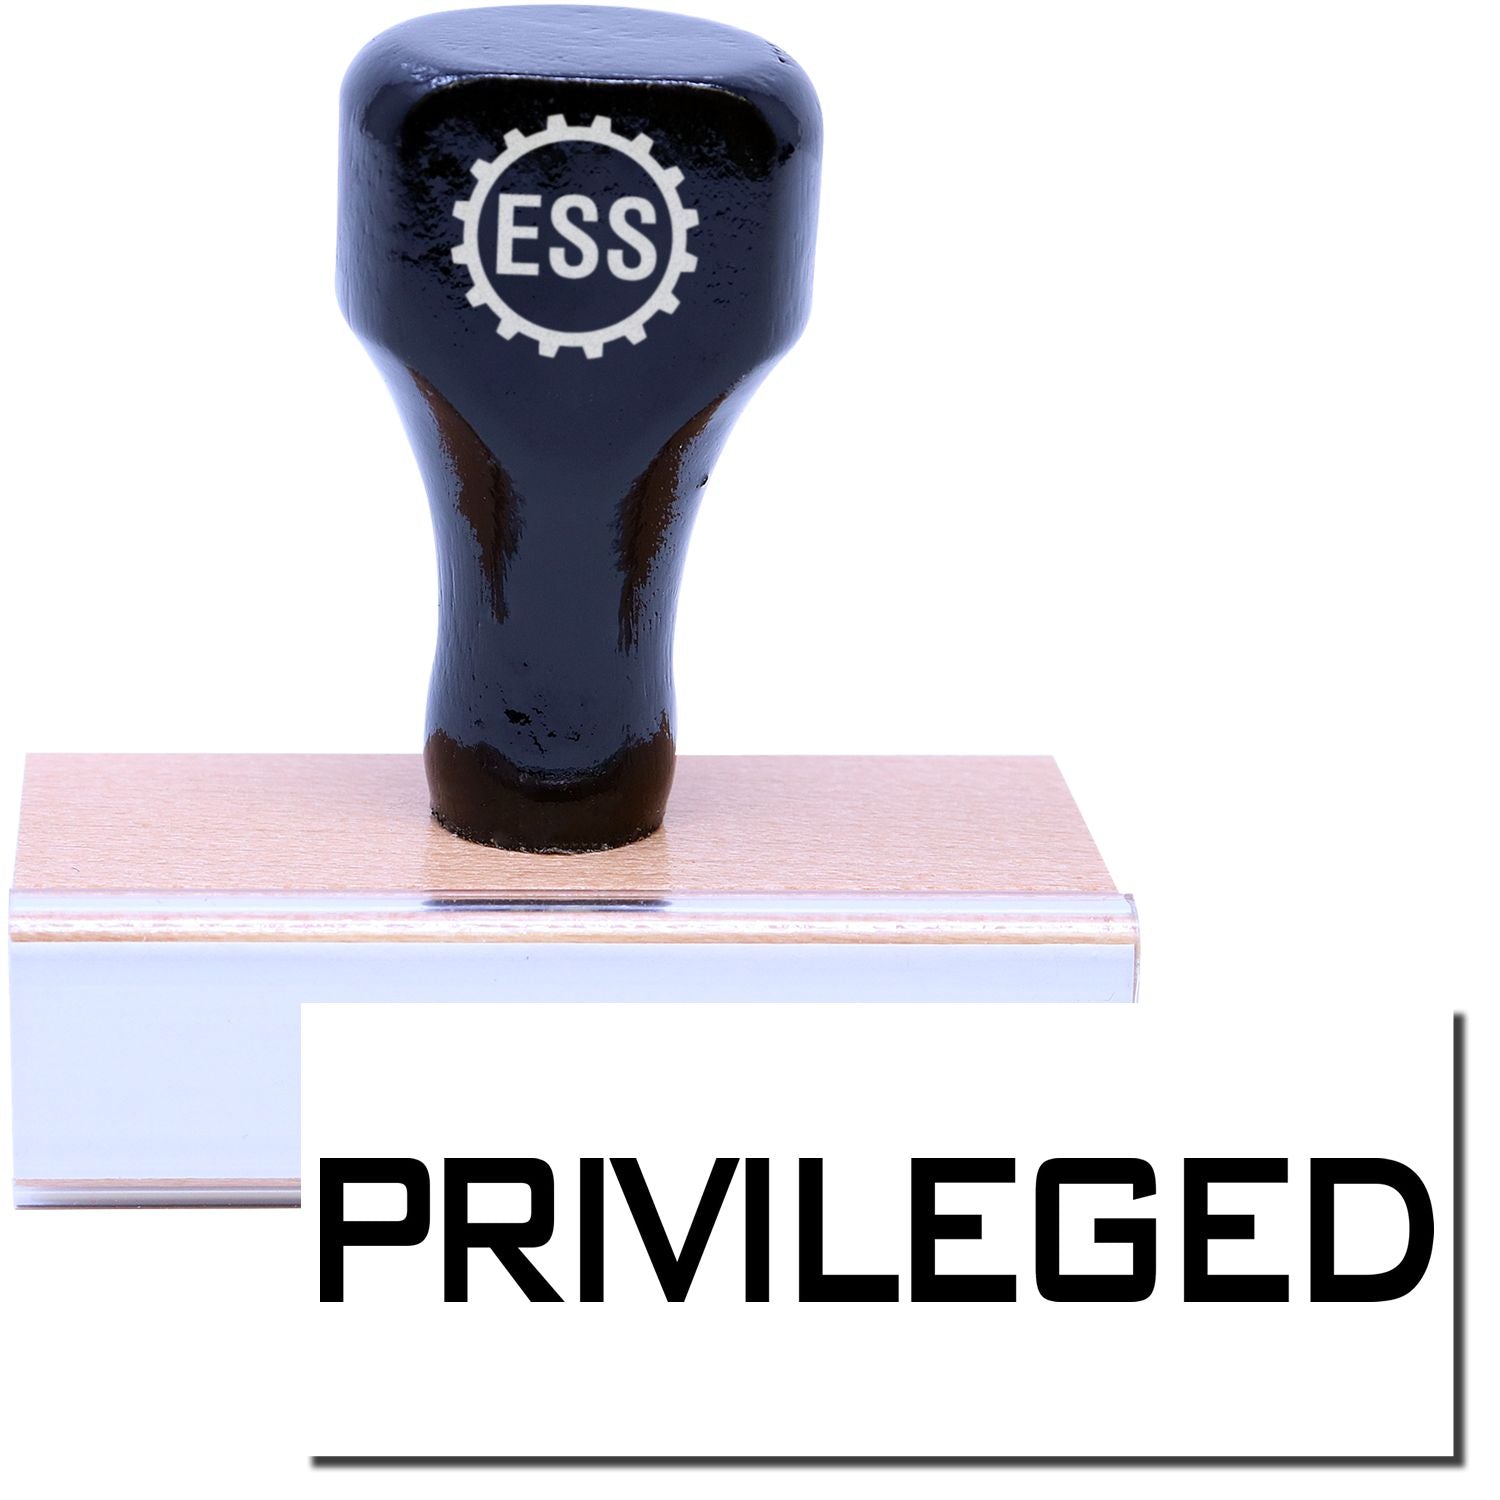 A stock office rubber stamp with a stamped image showing how the text "PRIVILEGED" in a large font is displayed after stamping.